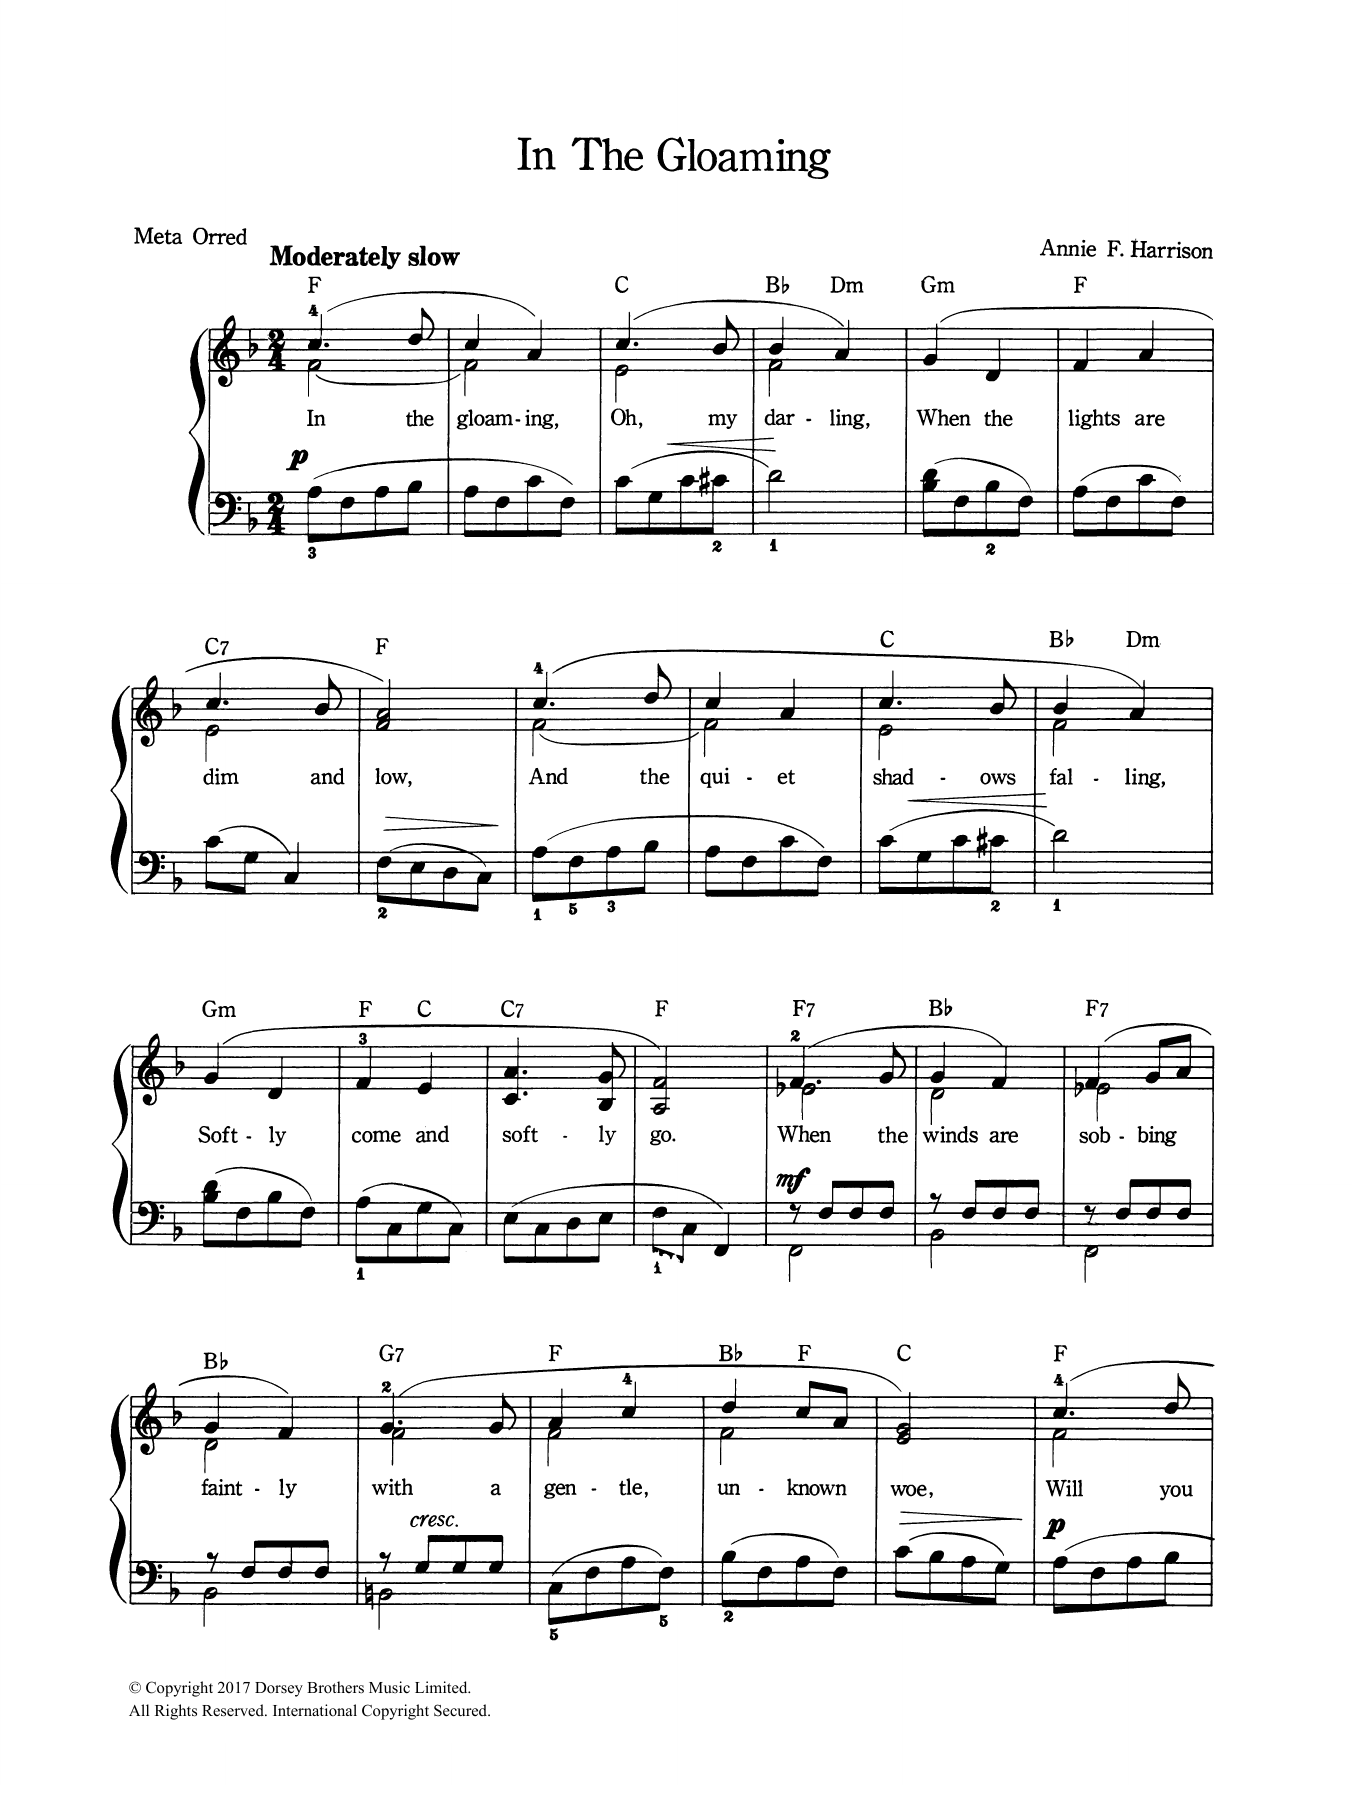 Download Annie F. Harrison In The Gloaming Sheet Music